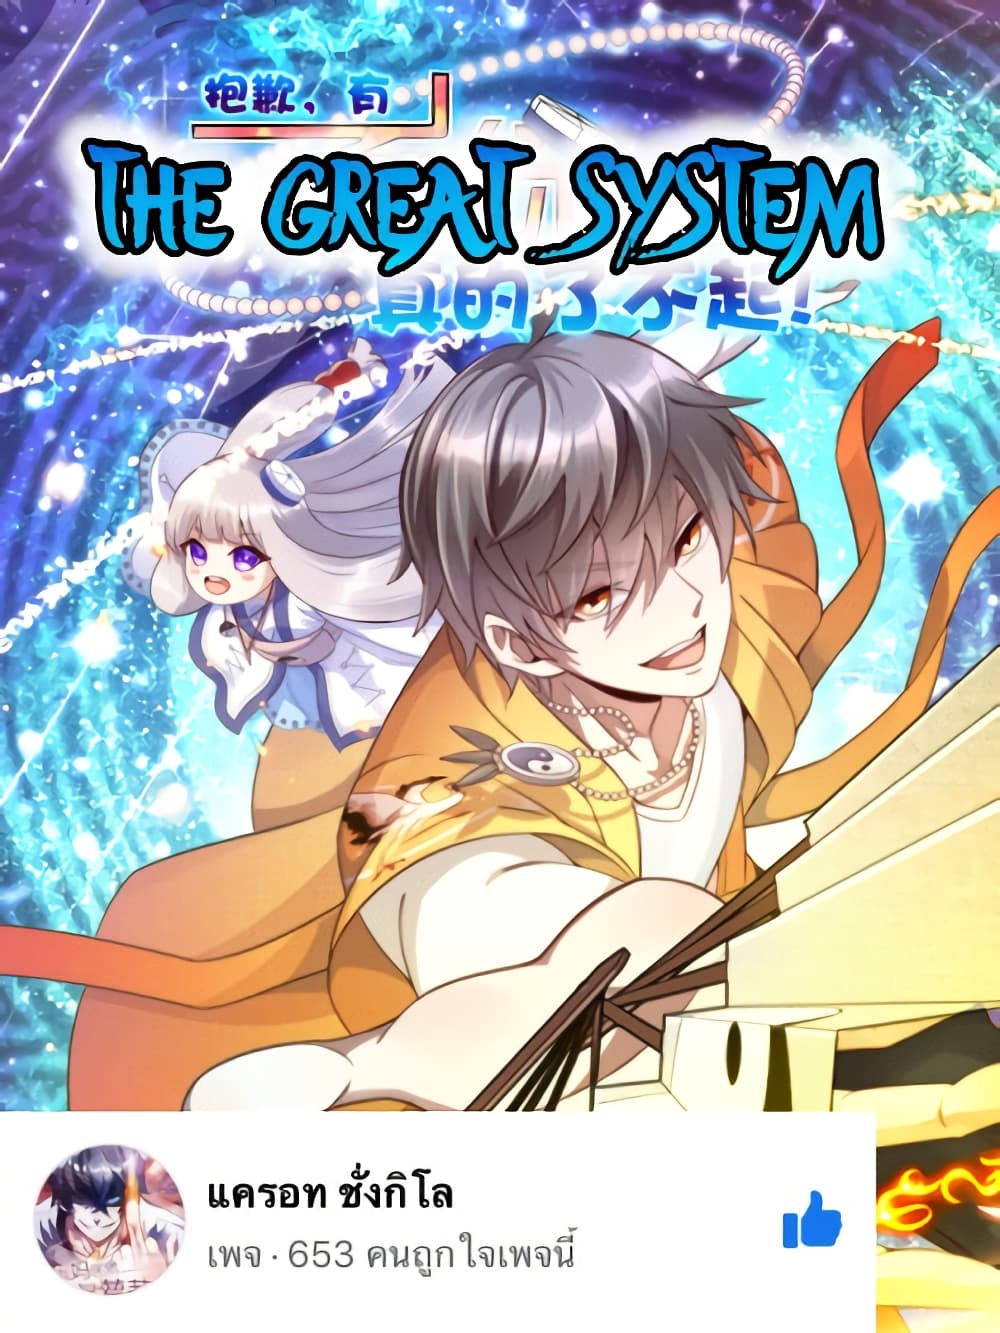 The Great System 29 (1)